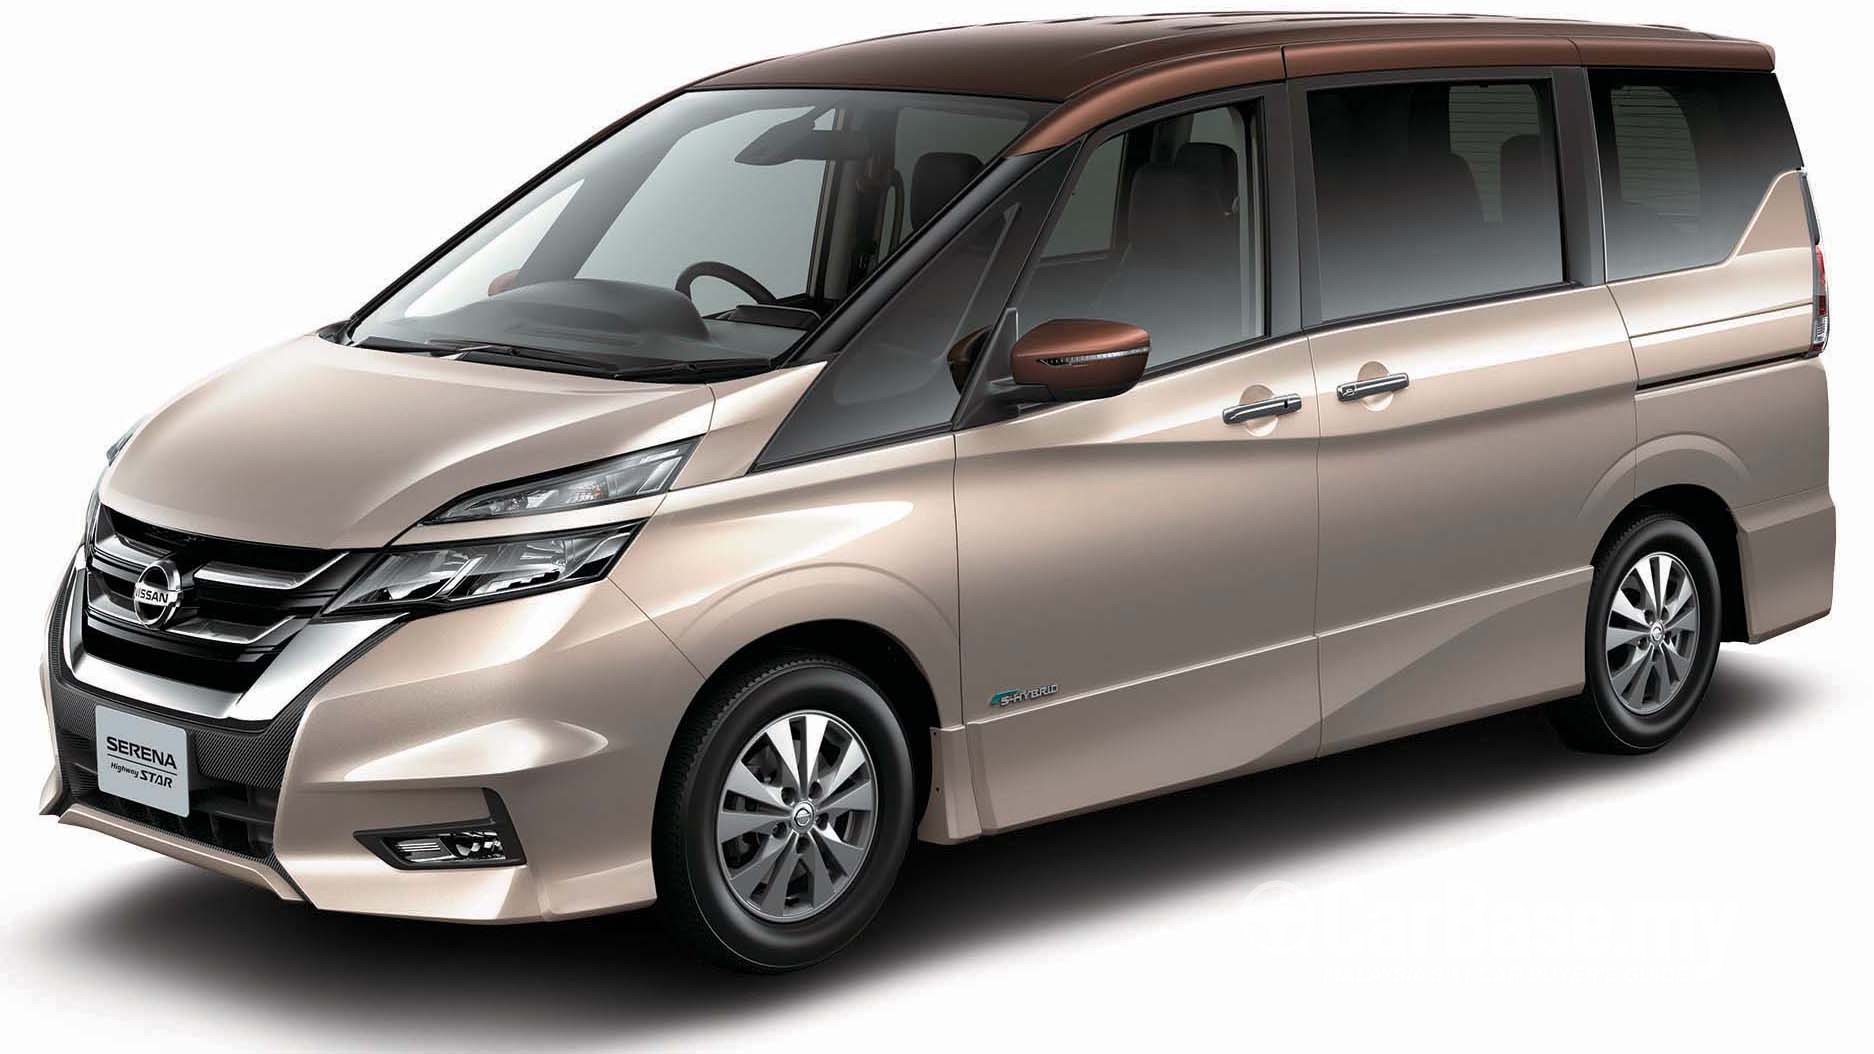 Nissan Serena SHybrid C27 (2018) Exterior Image in Malaysia  Reviews